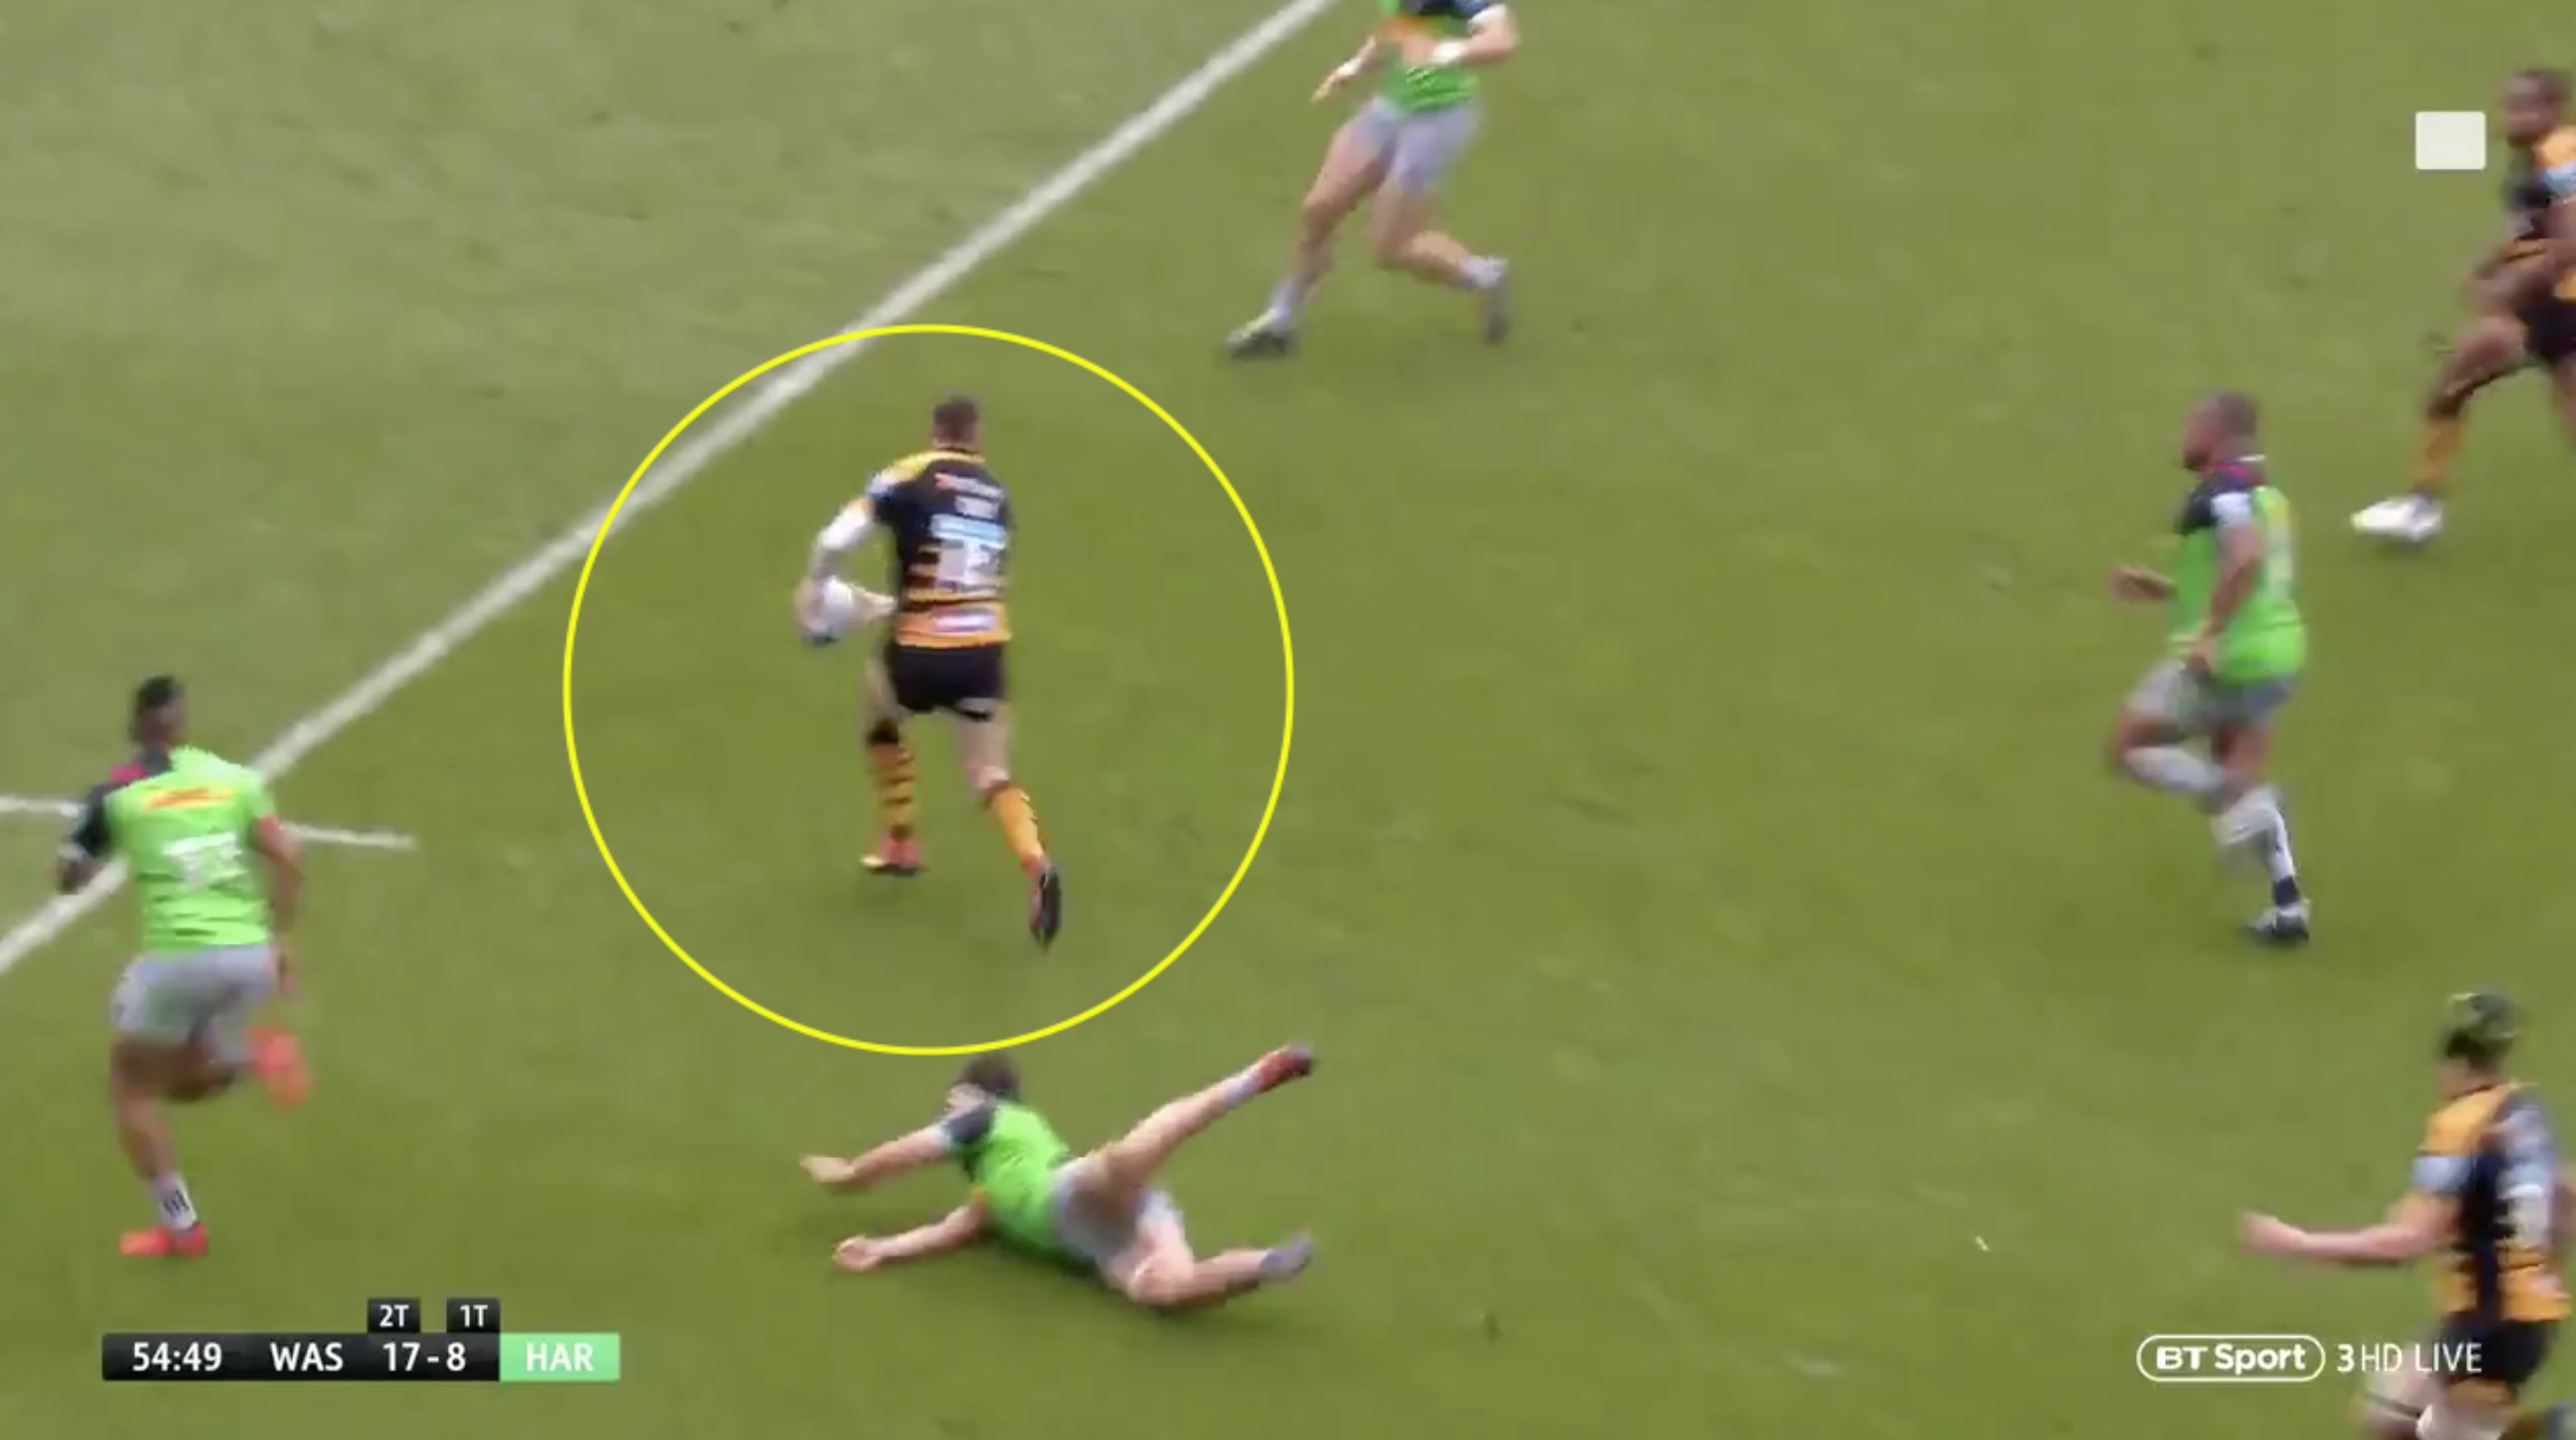 WATCH: Daly's unbelievable speed score shows why Saracens will be unbeatable next year